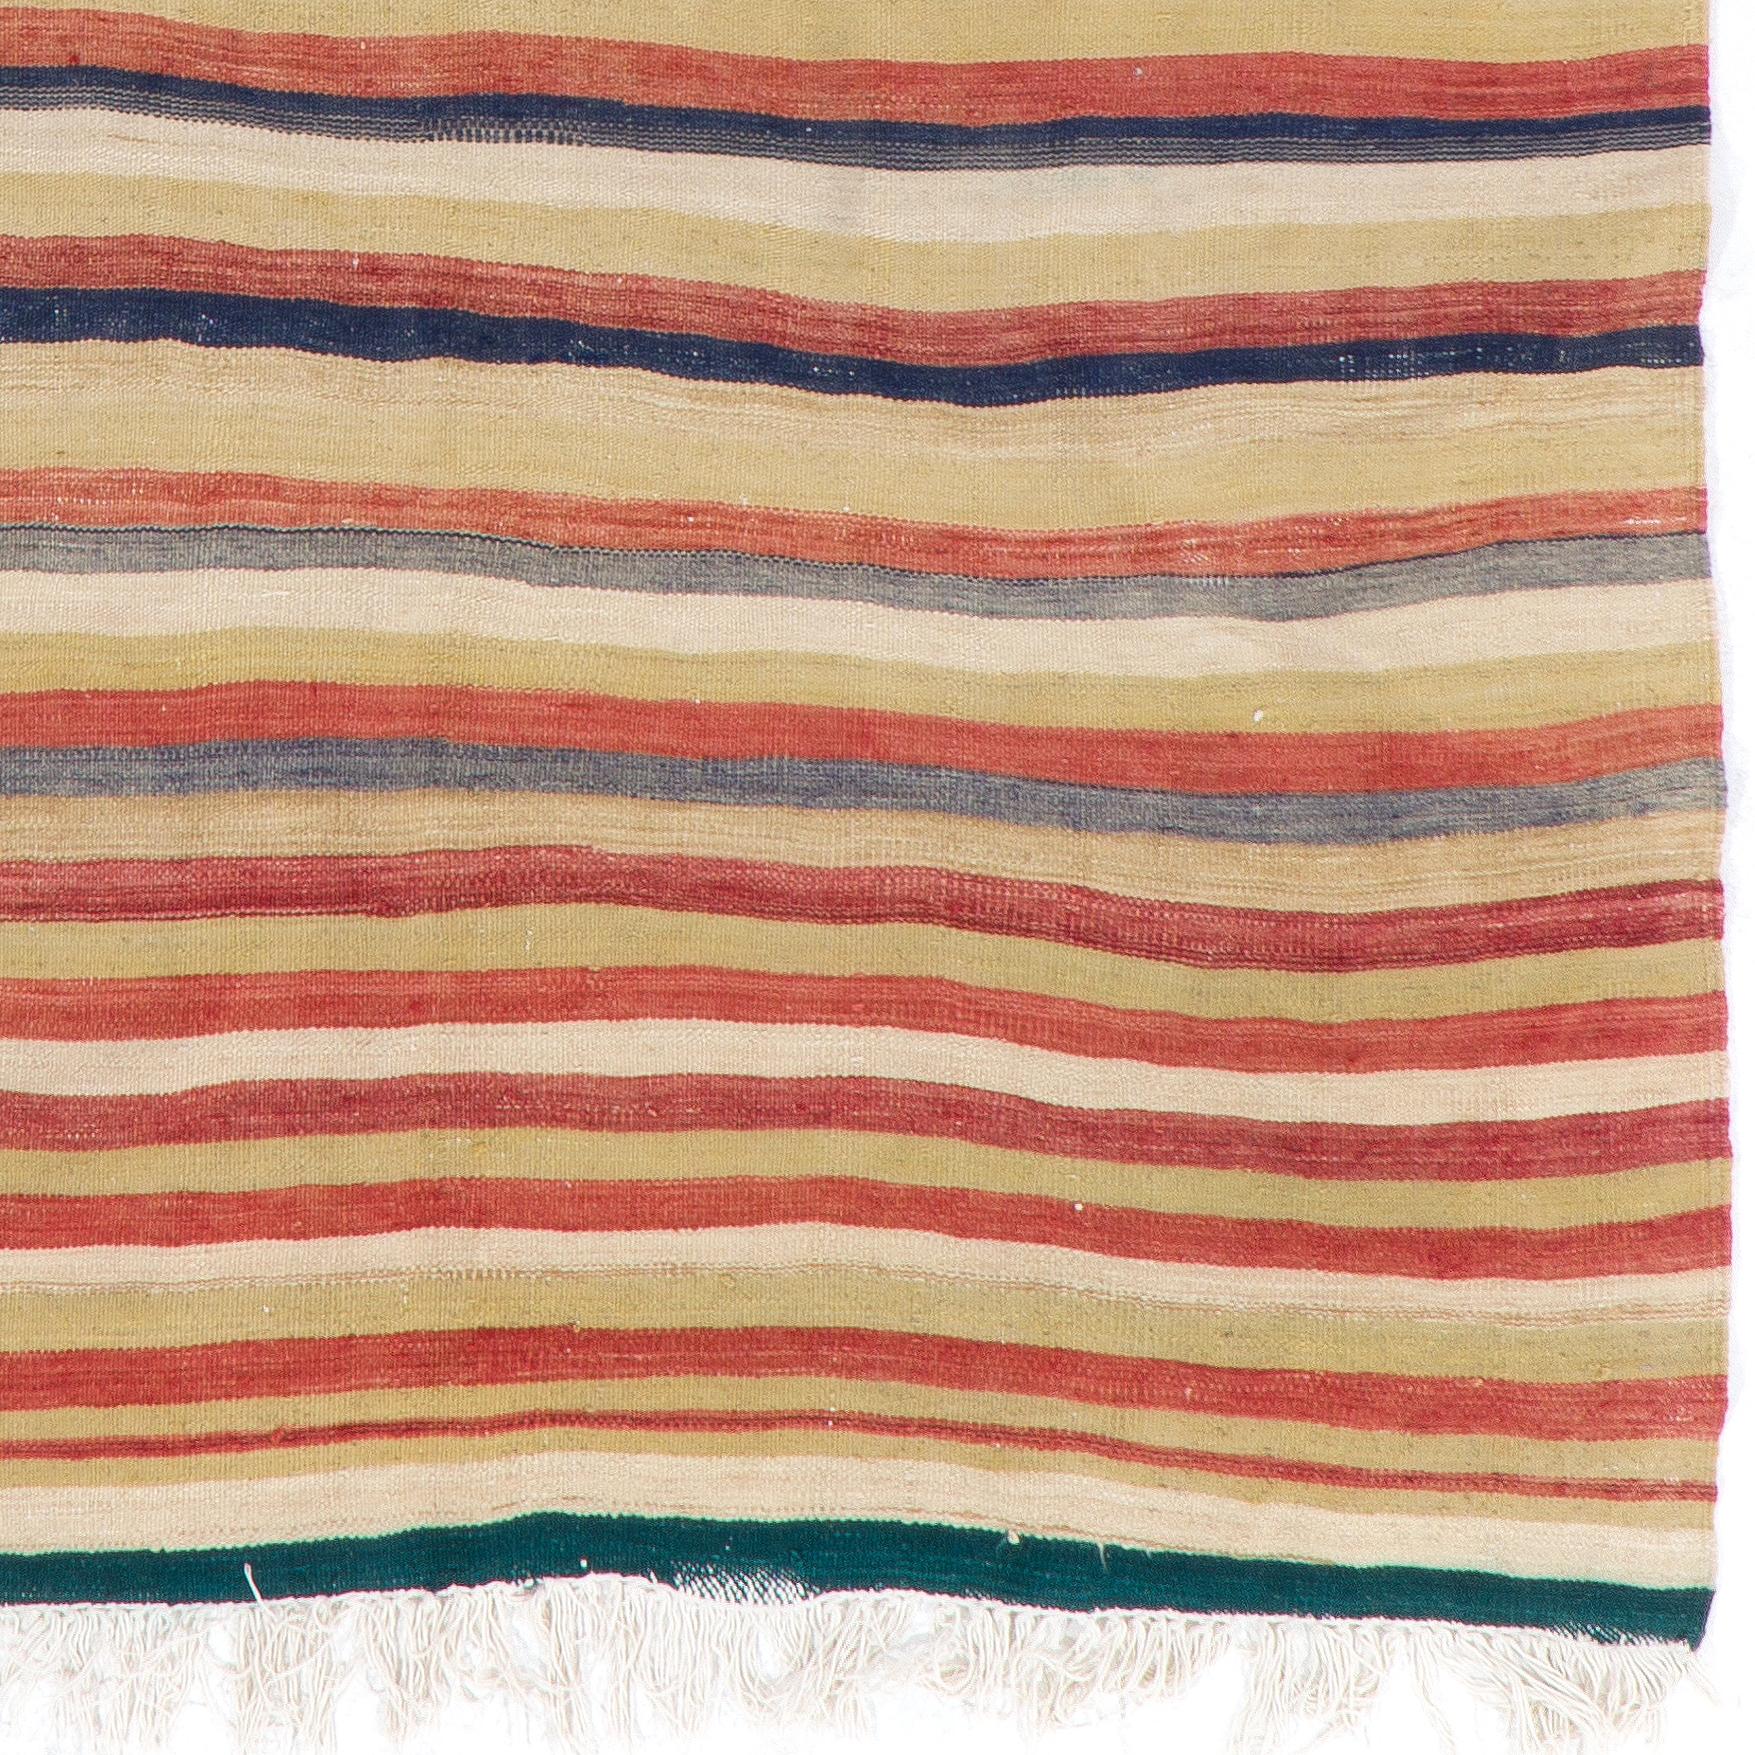 20th Century 5x8.4 Ft Hand-Woven Vintage Turkish Kilim Rug 'Flat Weave' with Striped Design For Sale